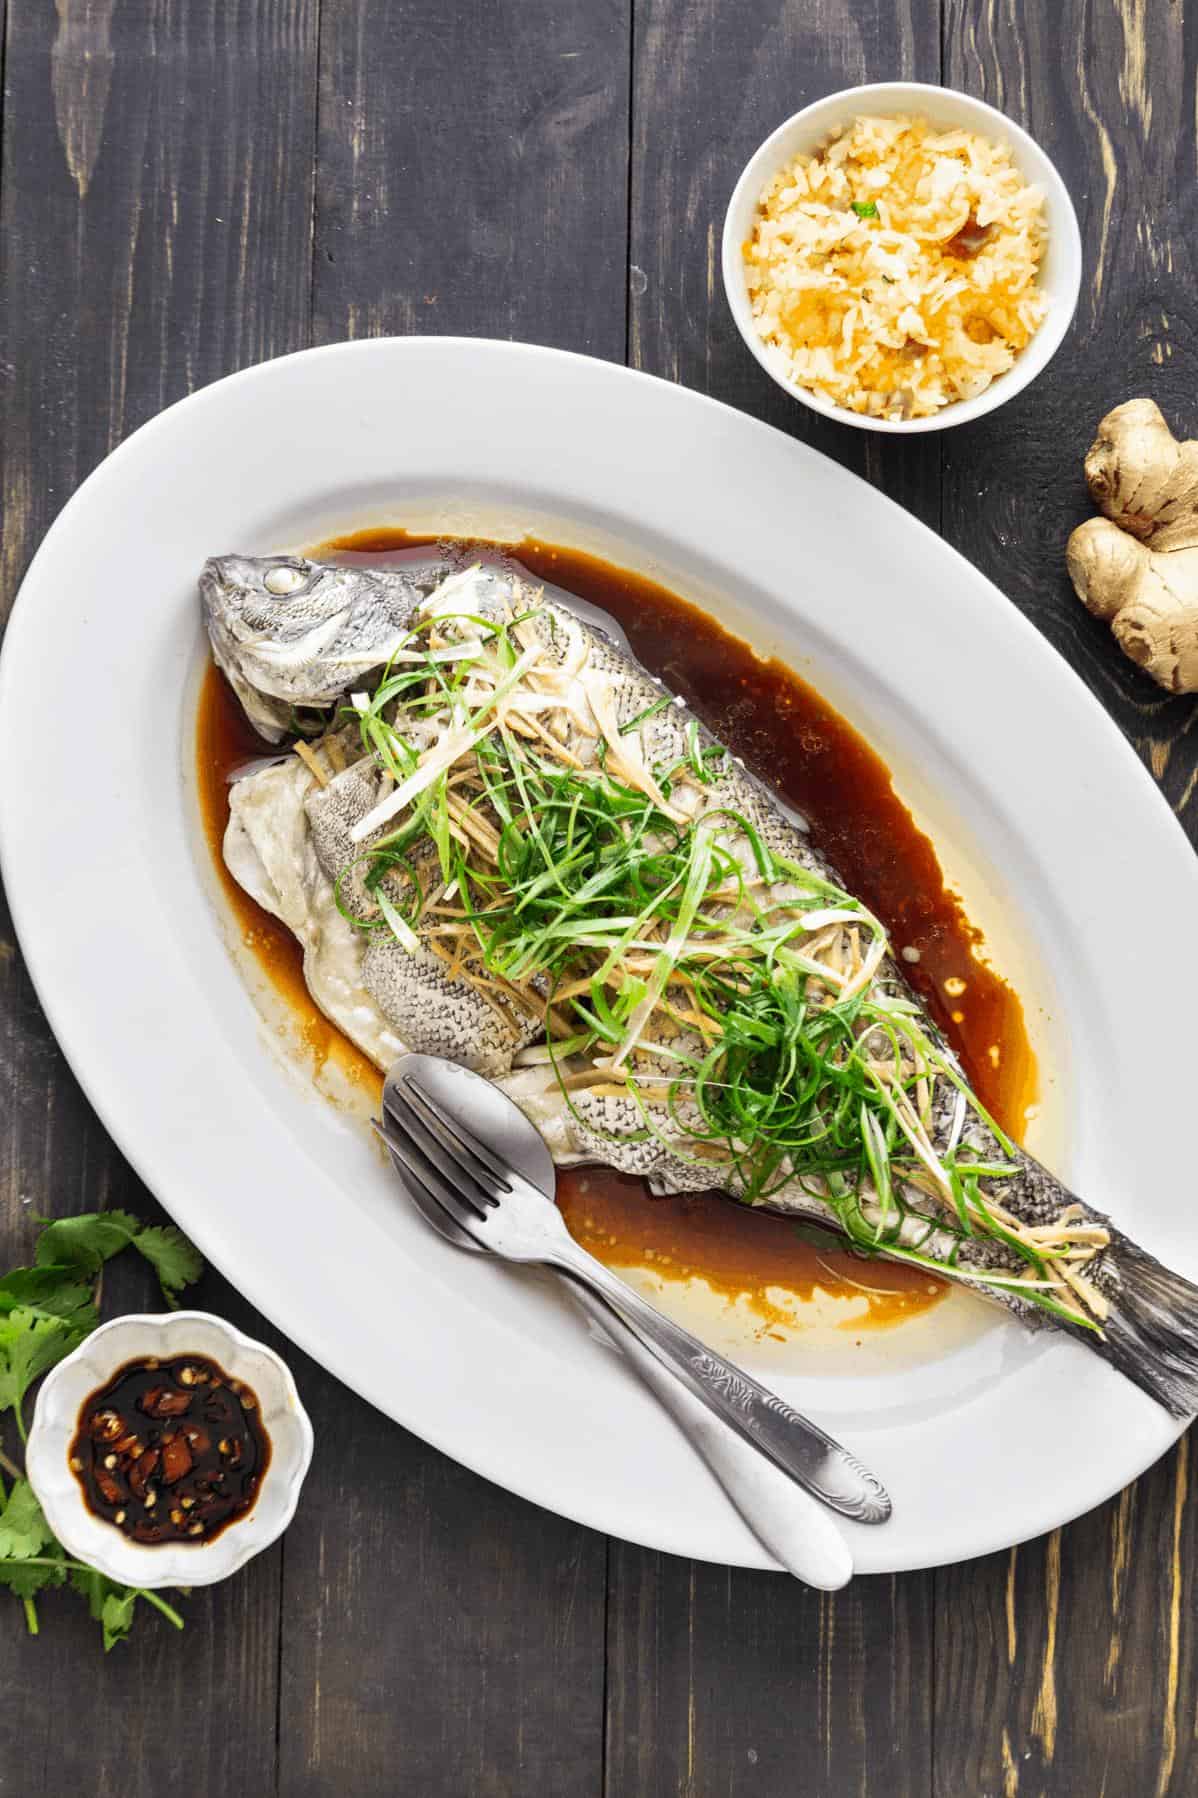  When you want something flavorful and light, steamed fish with ginger is the answer.